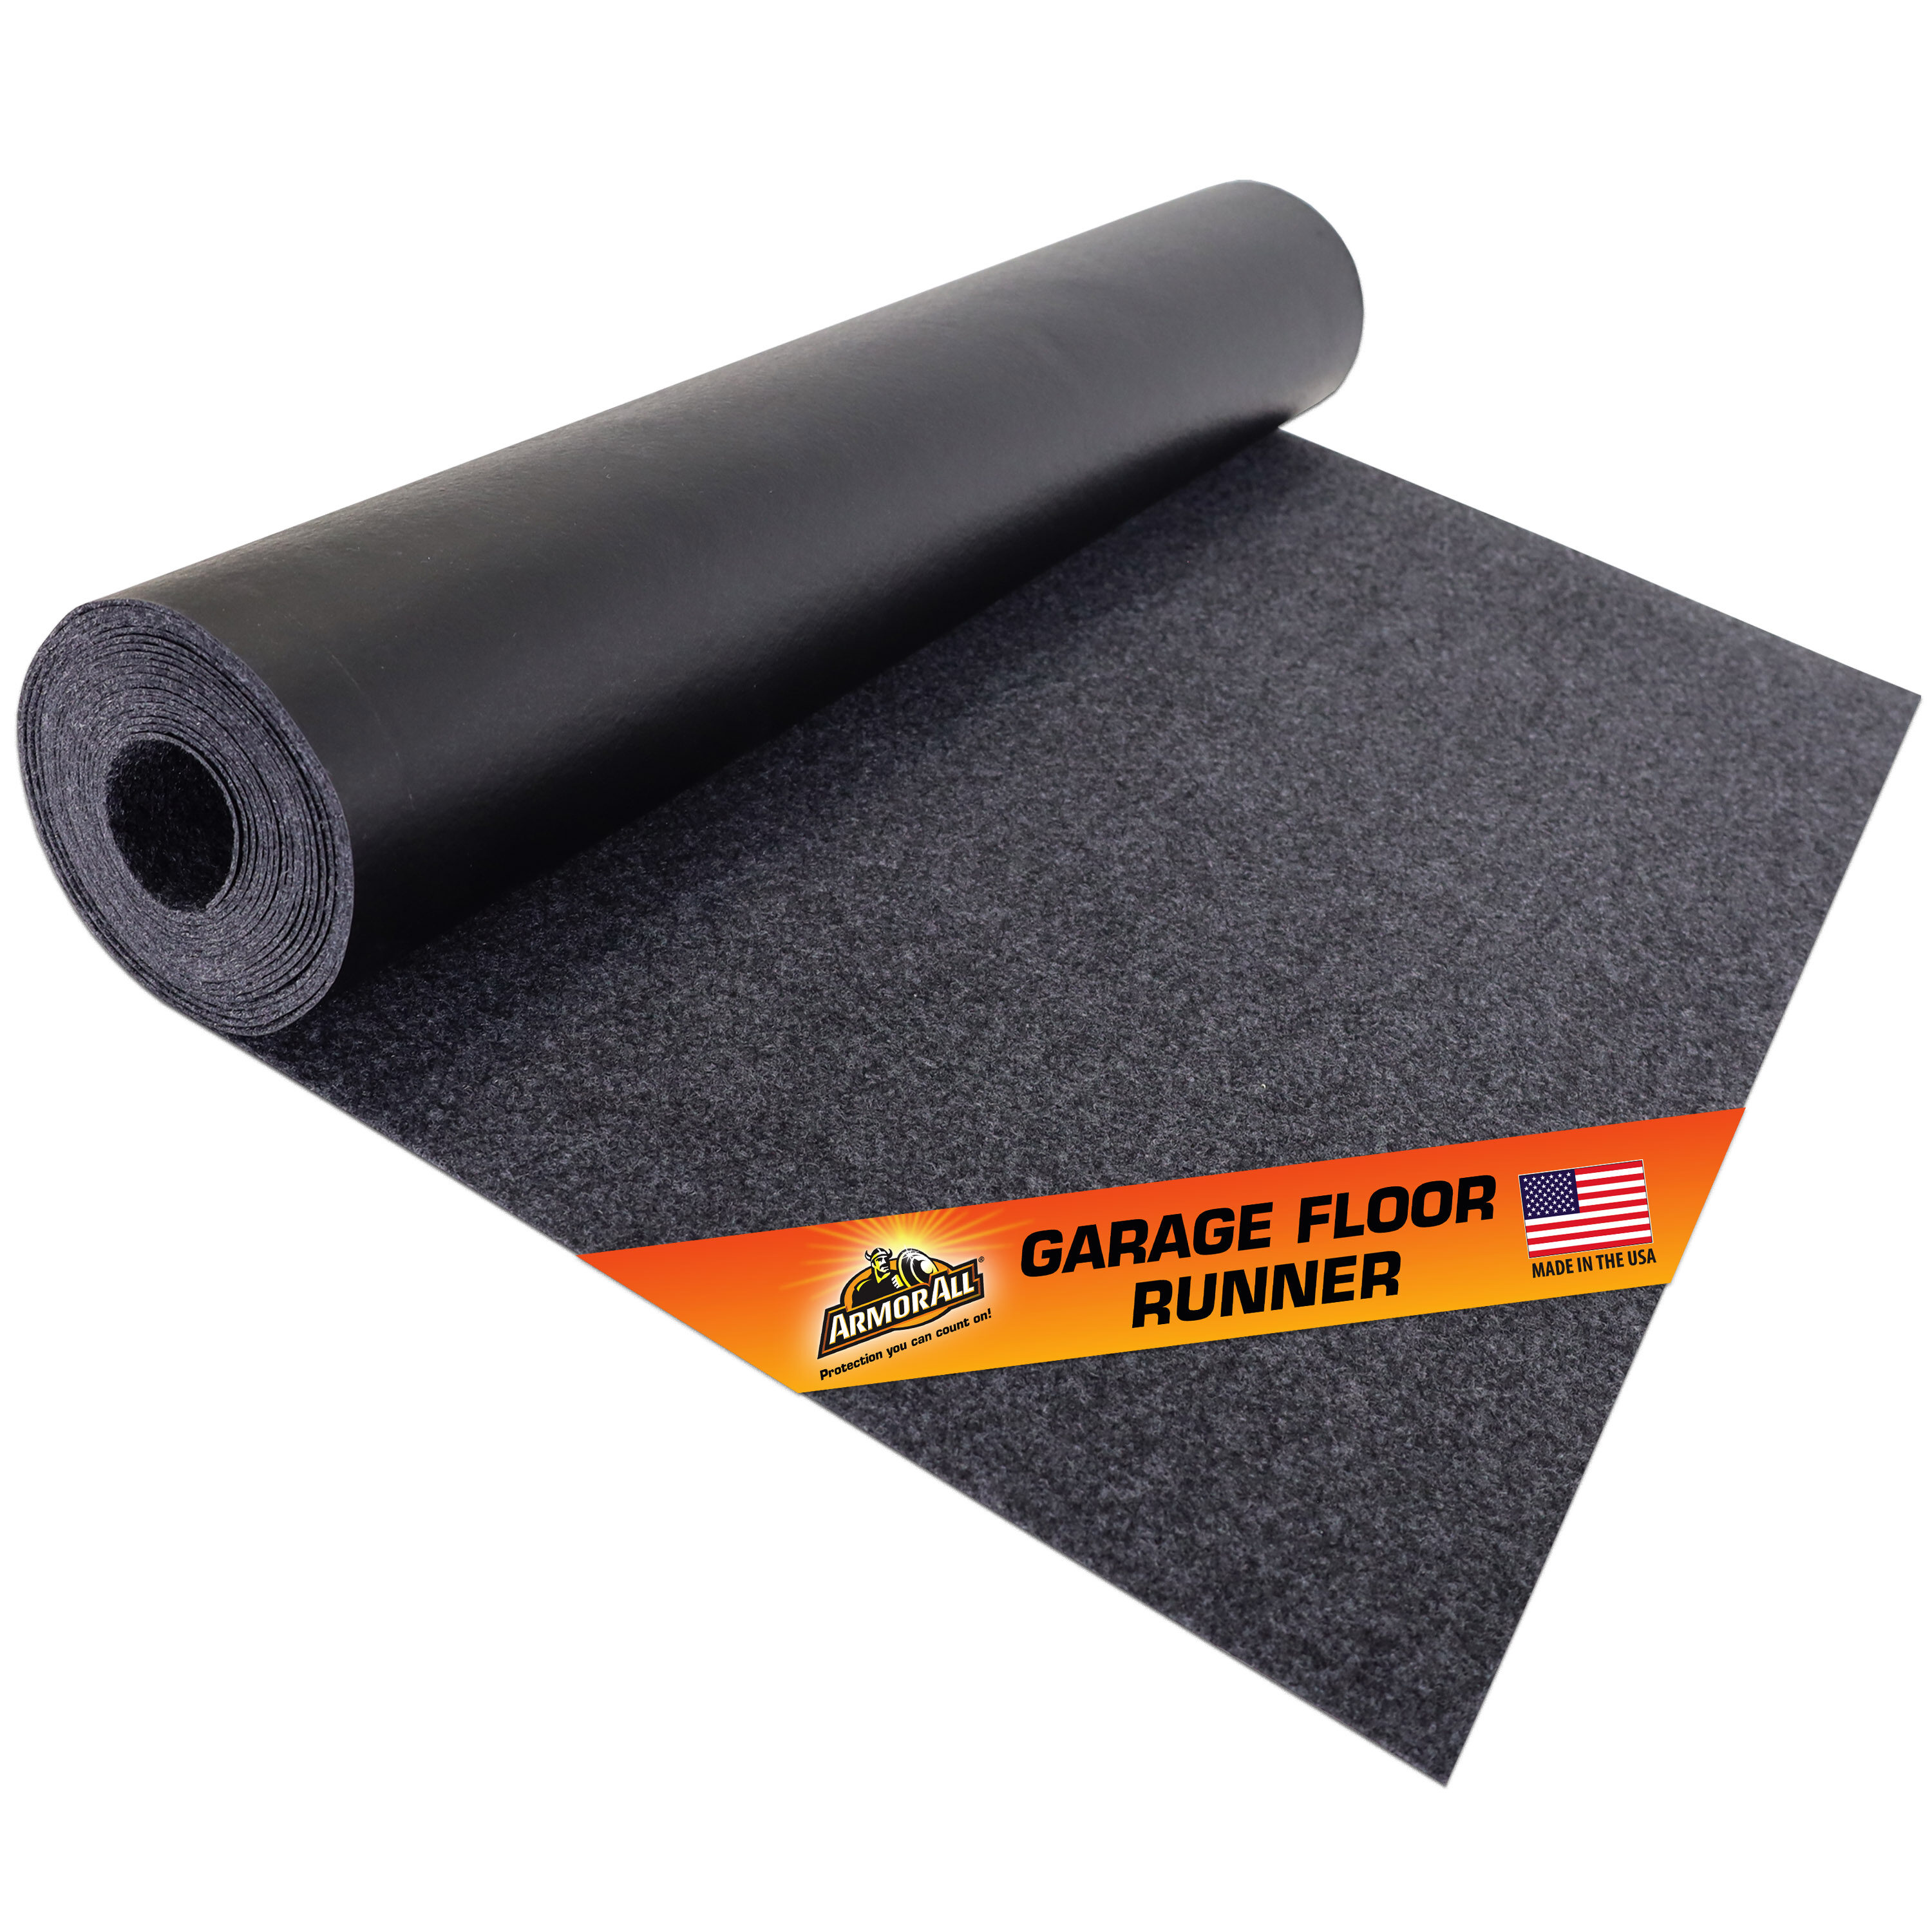 Pro Armorer Bench & Range Mat Available for Sale